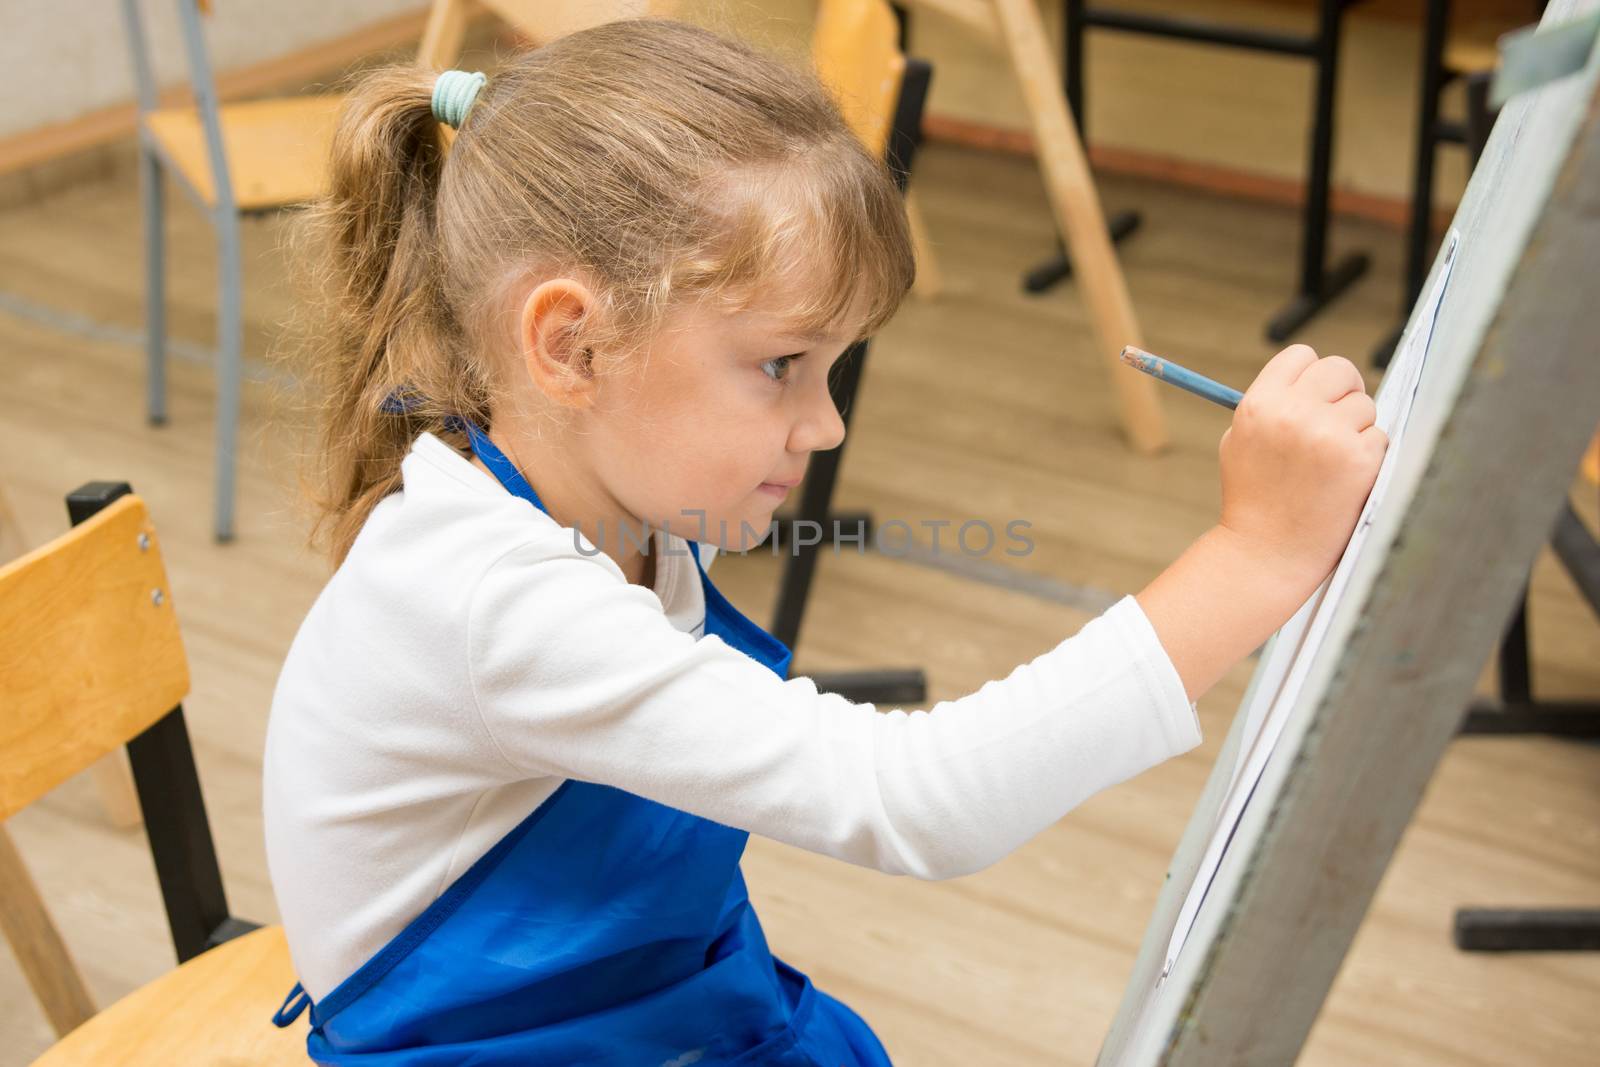 Five-year girl paints on an easel in the drawing lesson